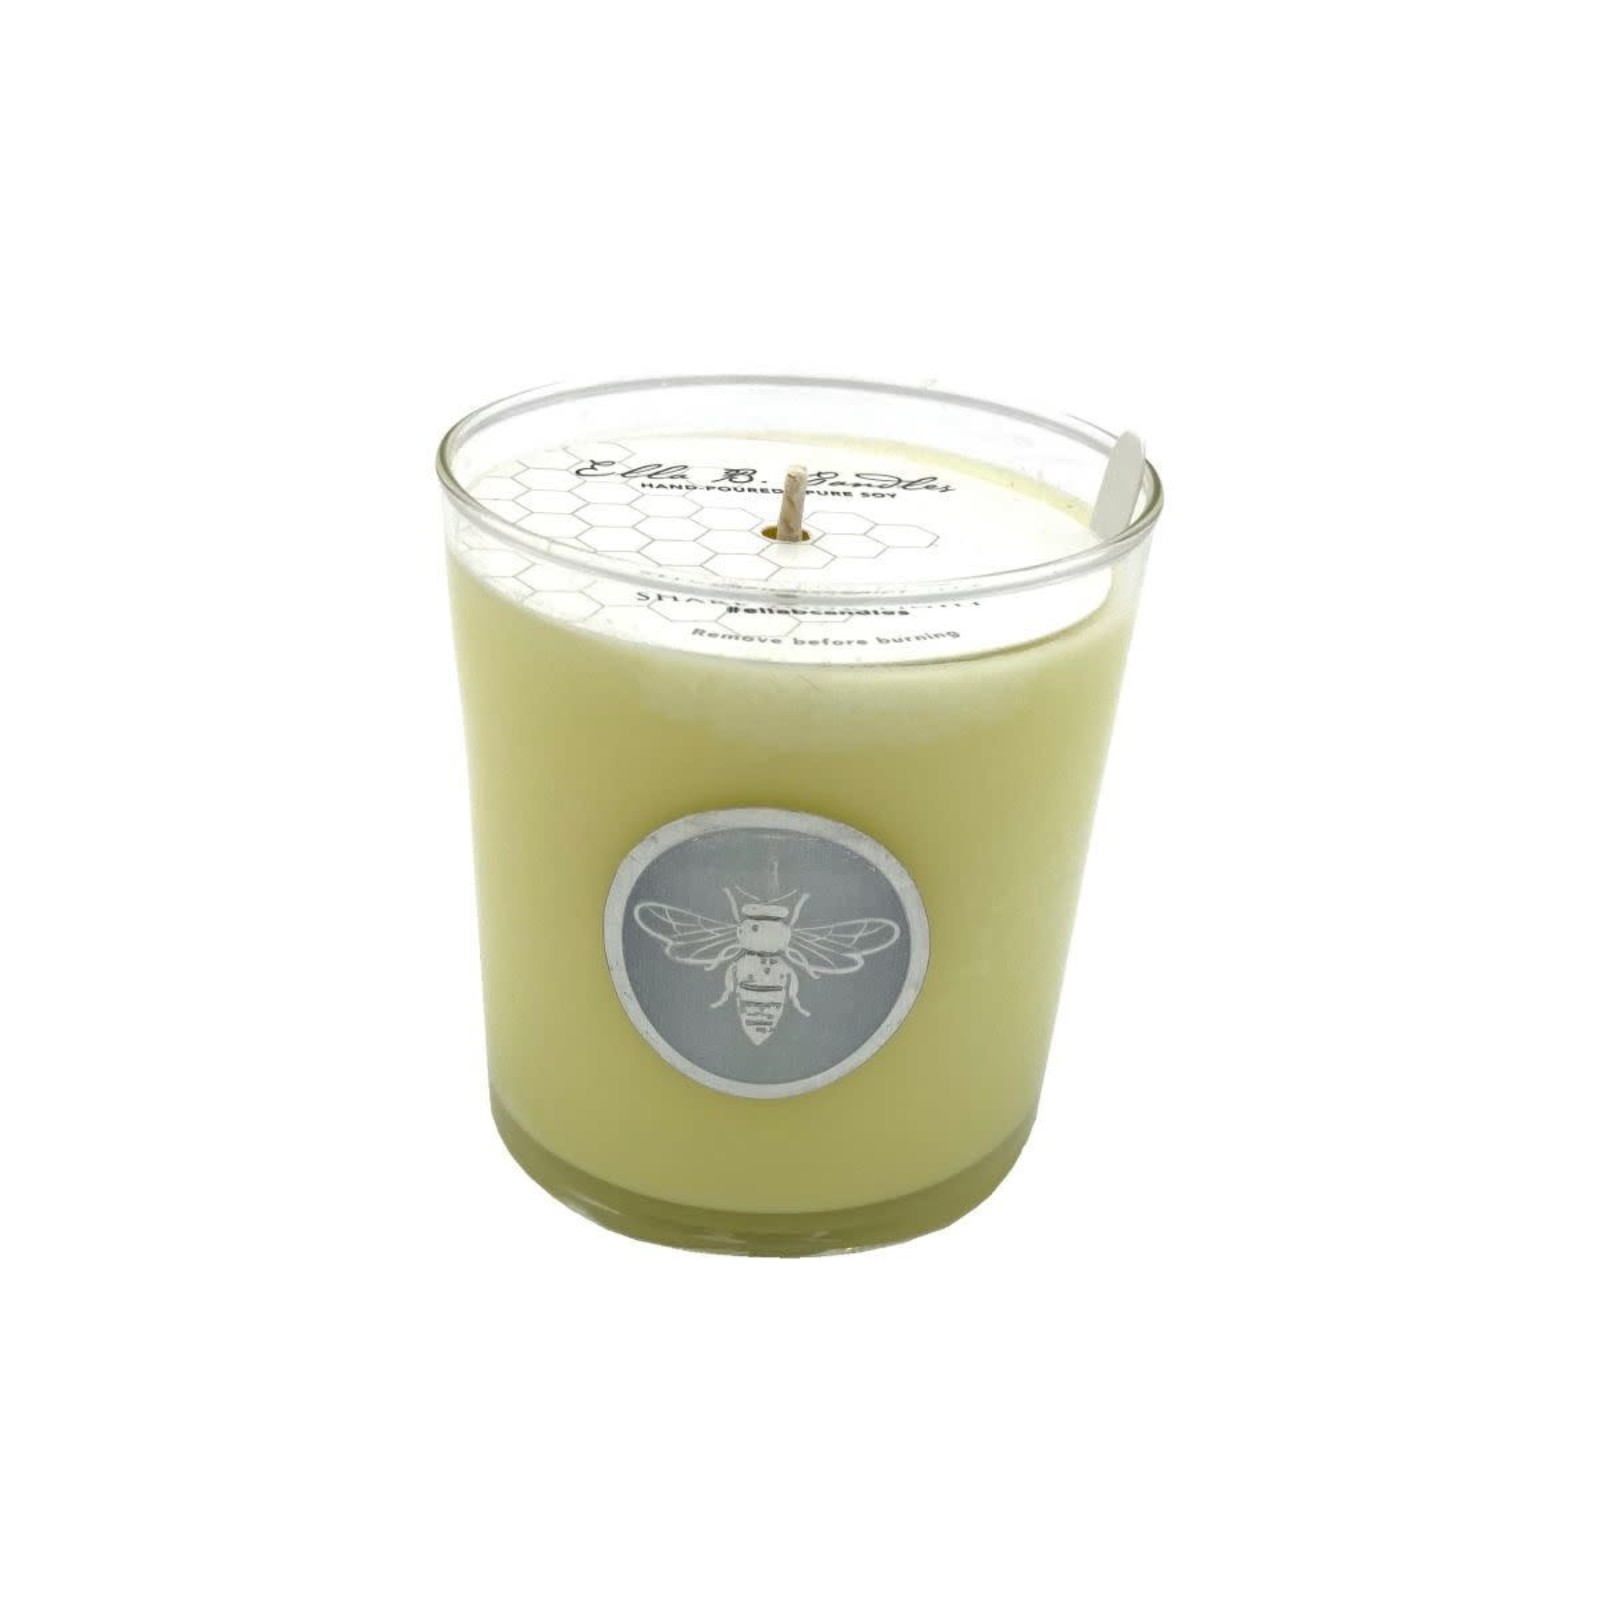 Ella B Candles Hand-Poured Soy Candle-Newberry  EB-NBS04 loading=